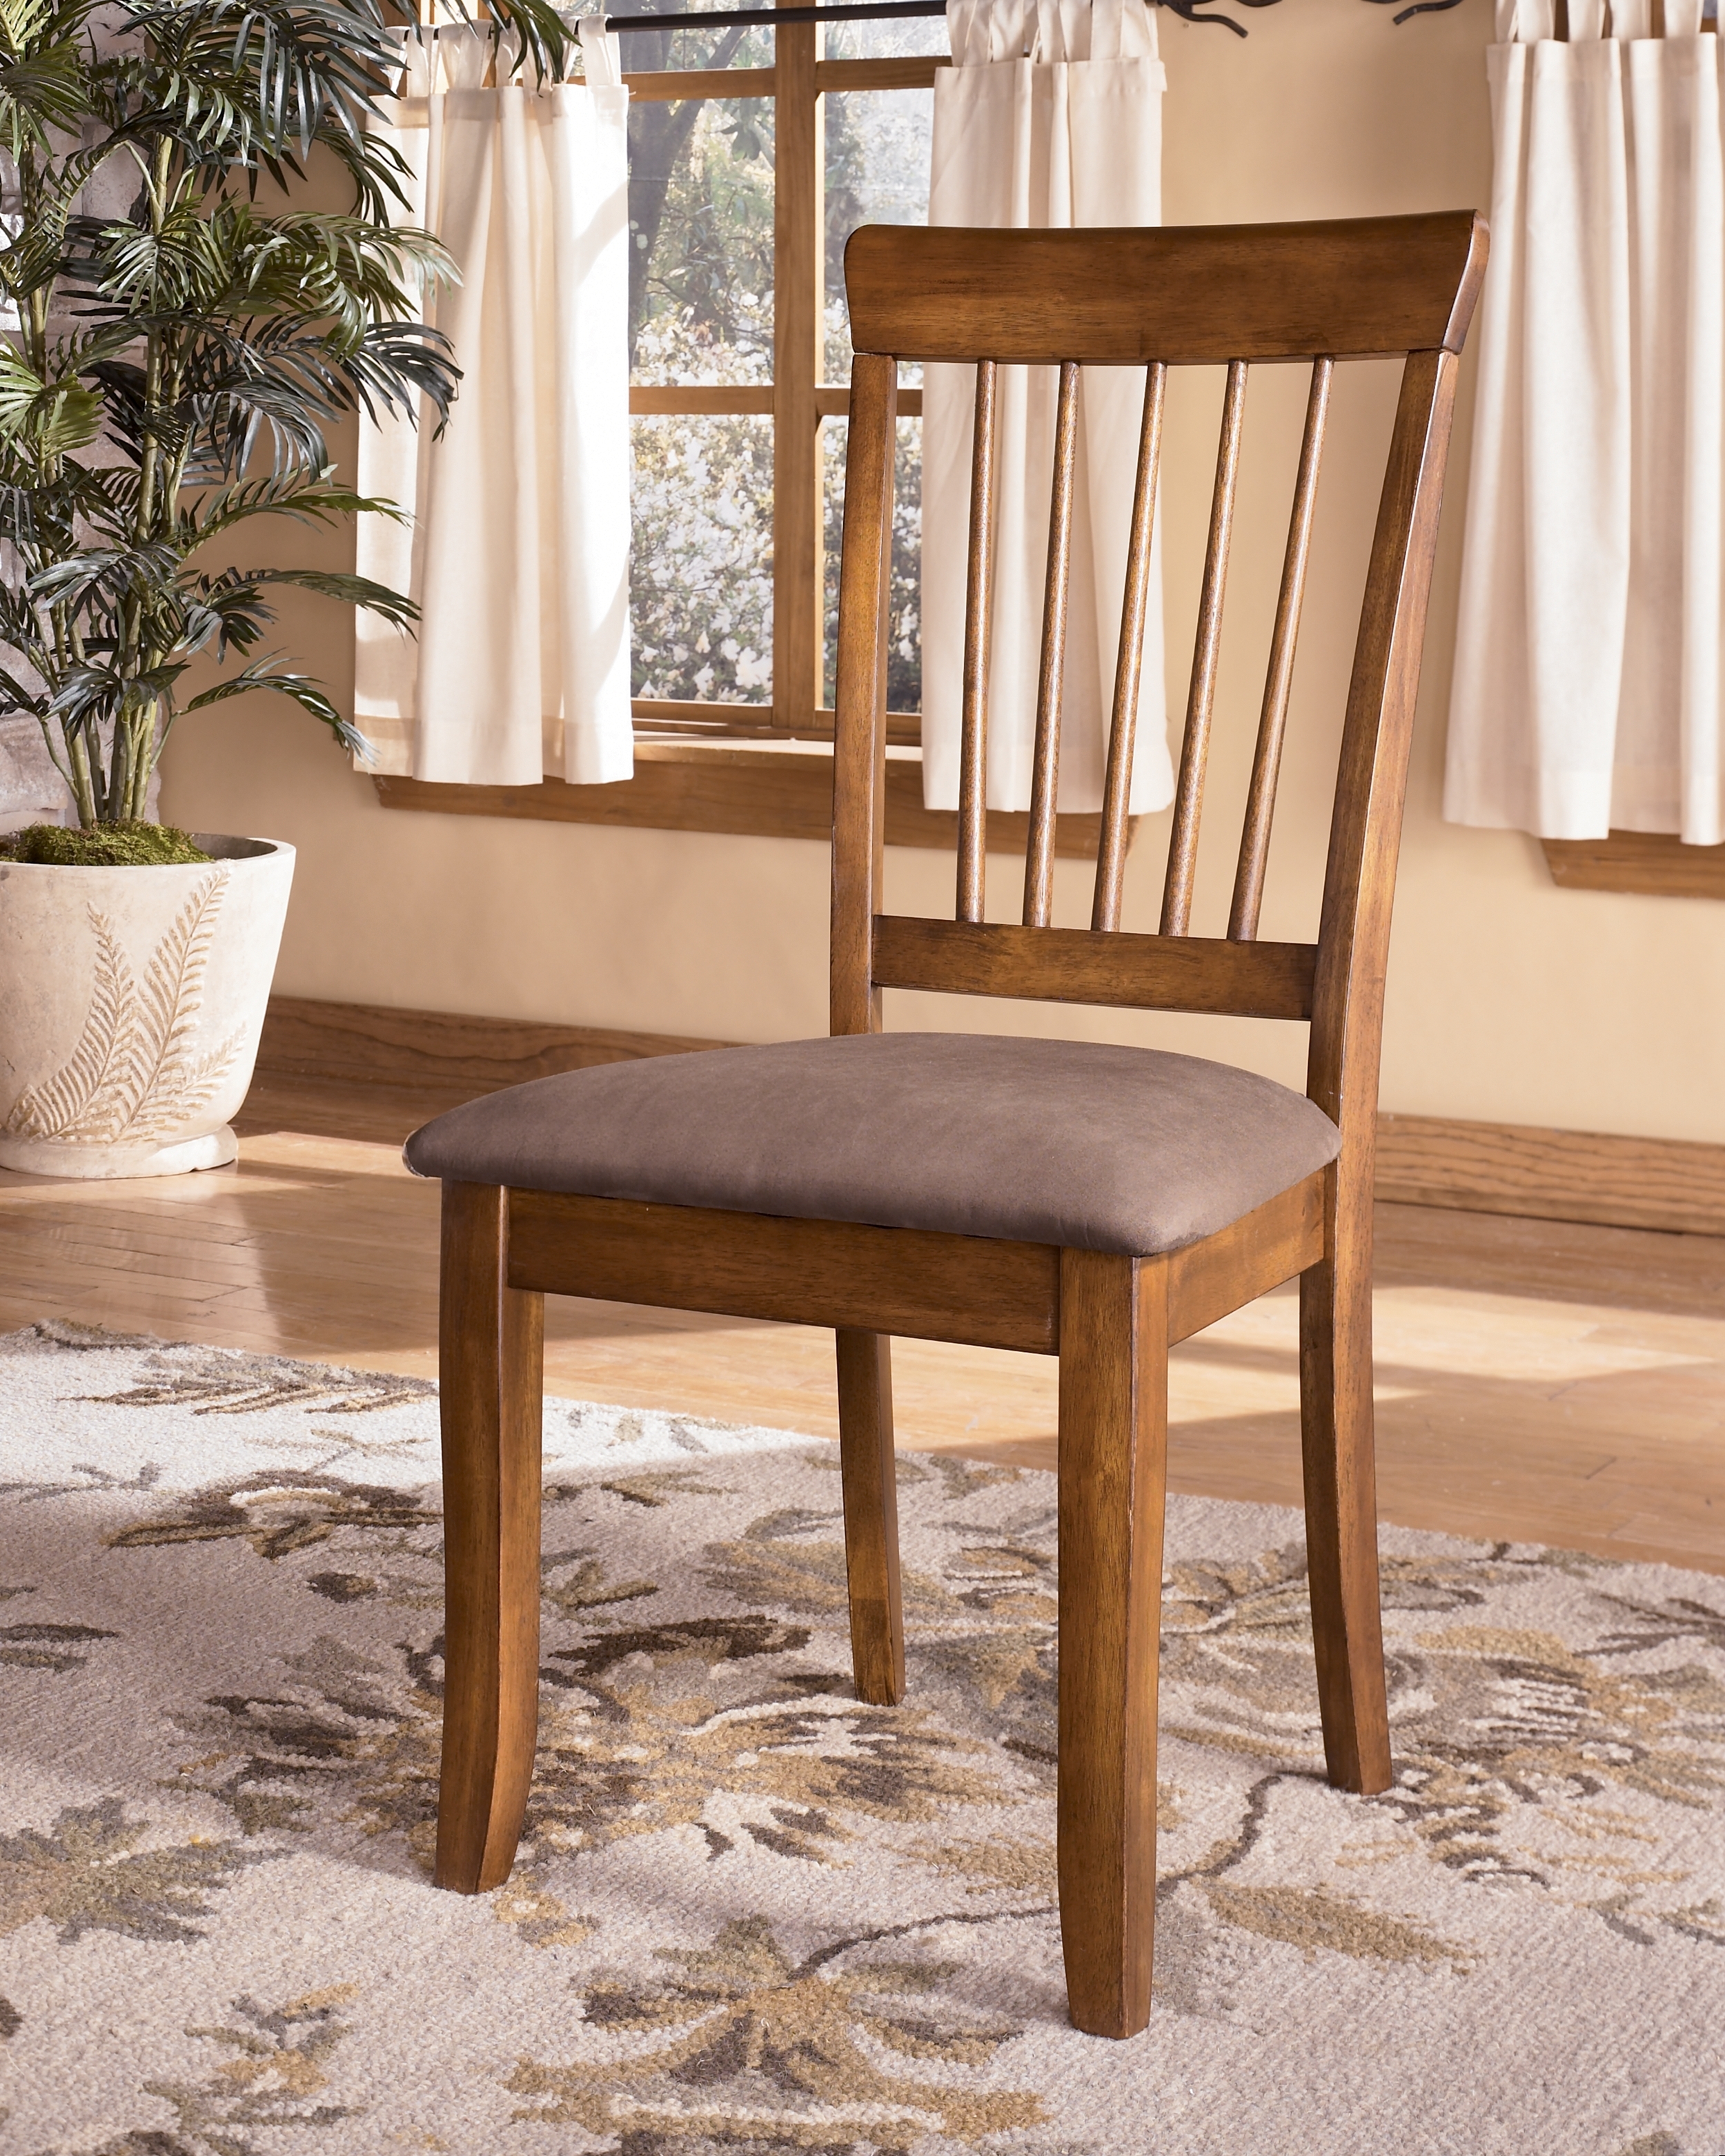 Sturdy dining chairs